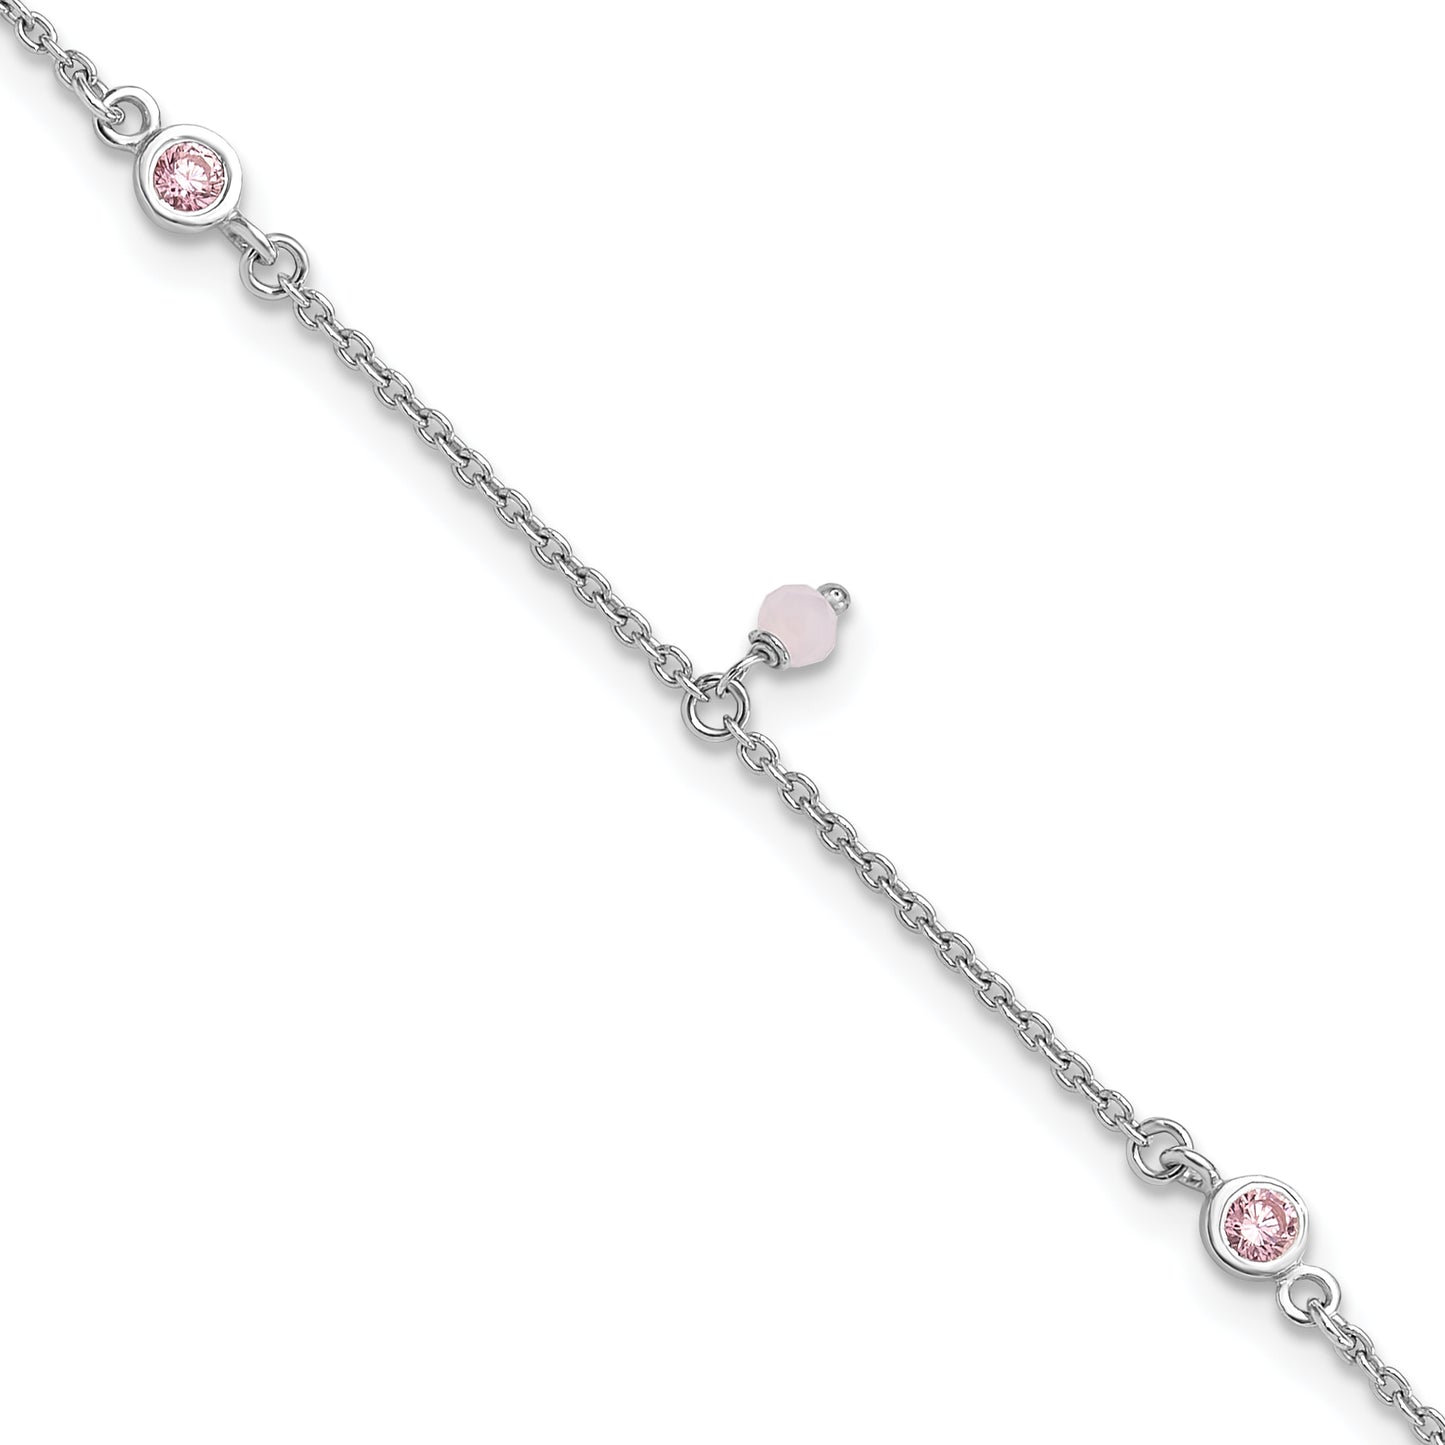 Sterling Silver Rhod-plated Pink CZ/Glass Beads 9in Plus 1in ext Anklet